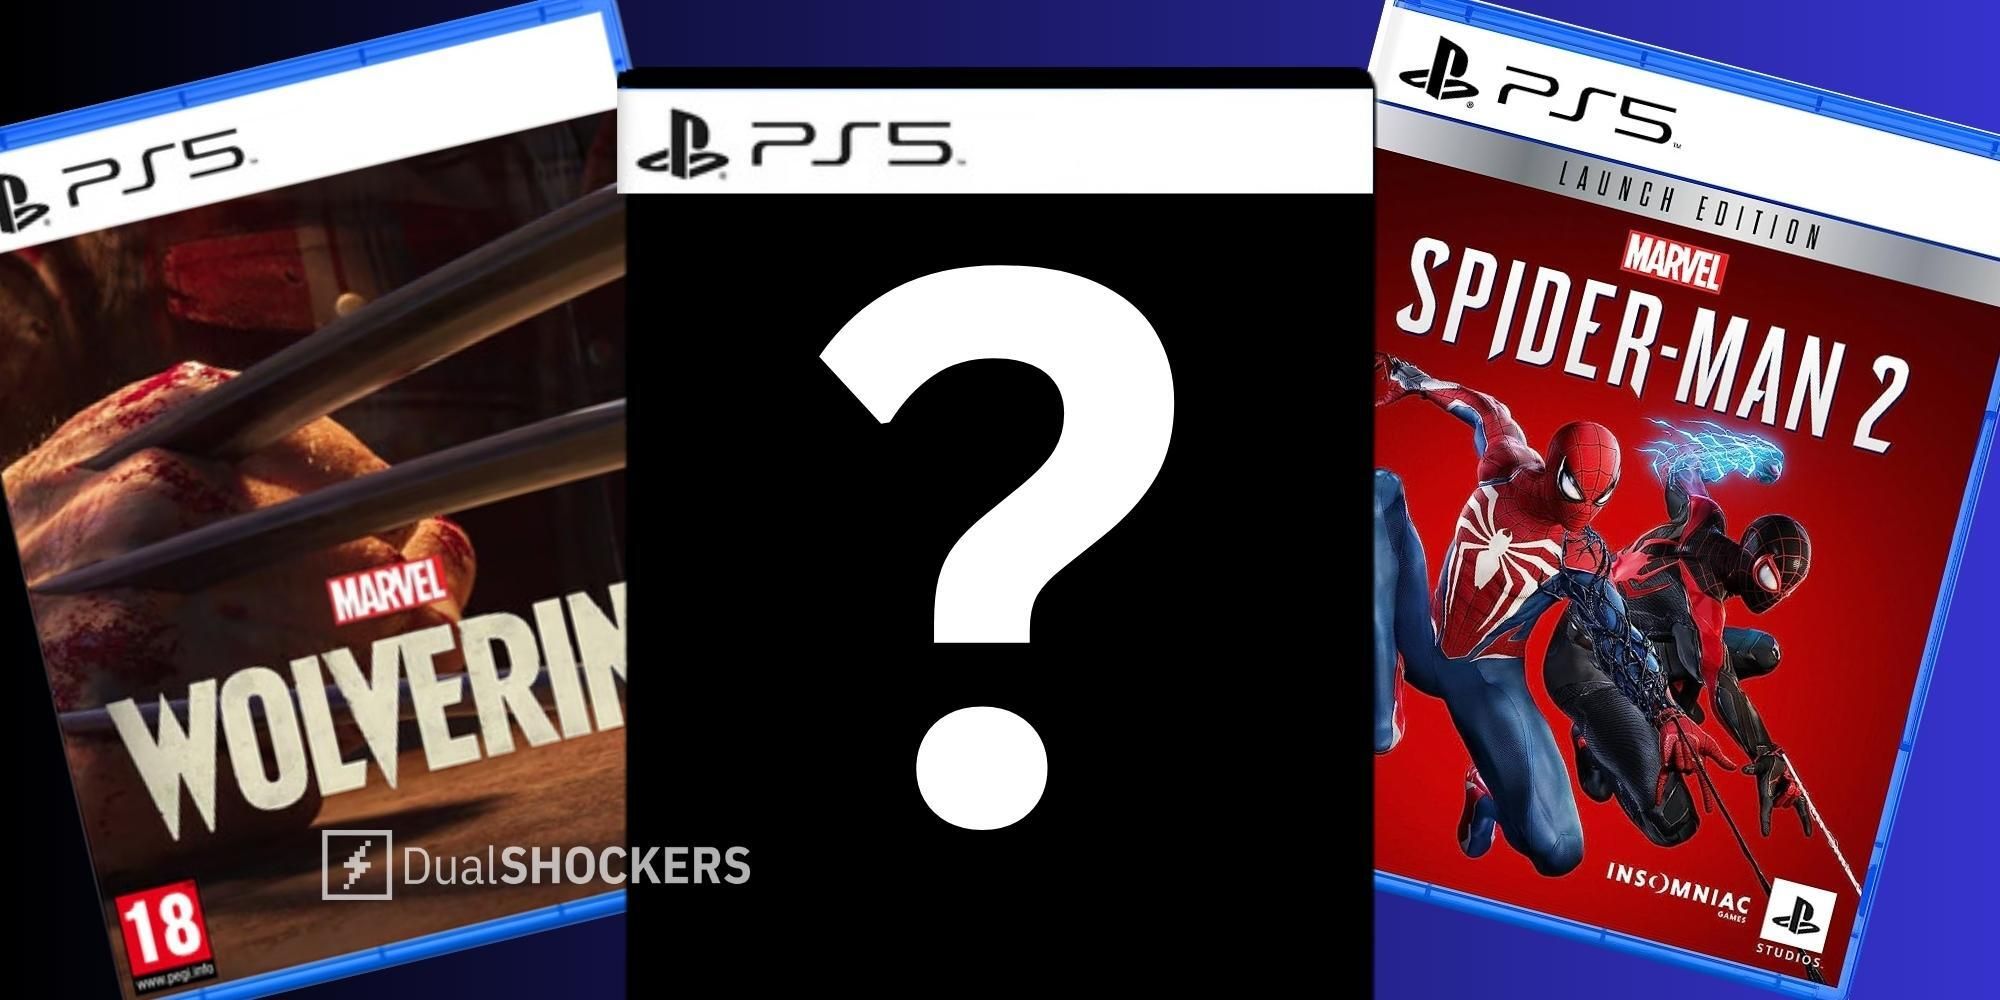 Marvel's Wolverine and Spider-Man 2 With a mystery game